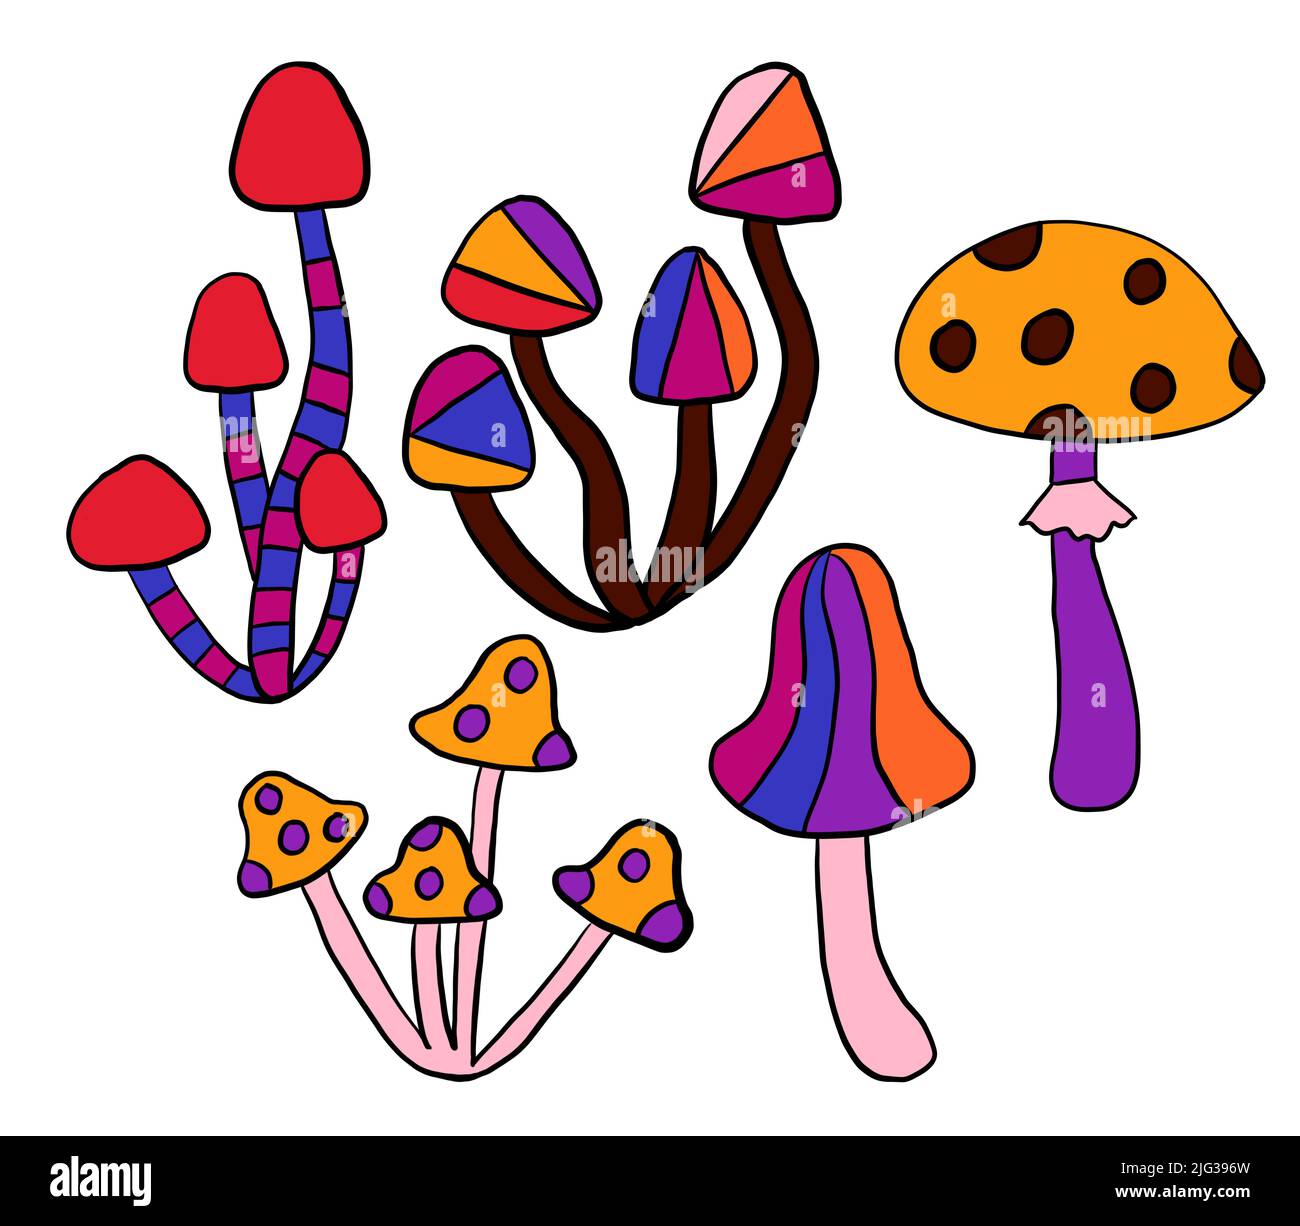 Hand drawn clipart illustration with hippie groovy mushrooms in orange purple blue red colors. Retro vintage 1960s 1970s style, trippy wild bright background with hallucination hypnotic elements Stock Photo